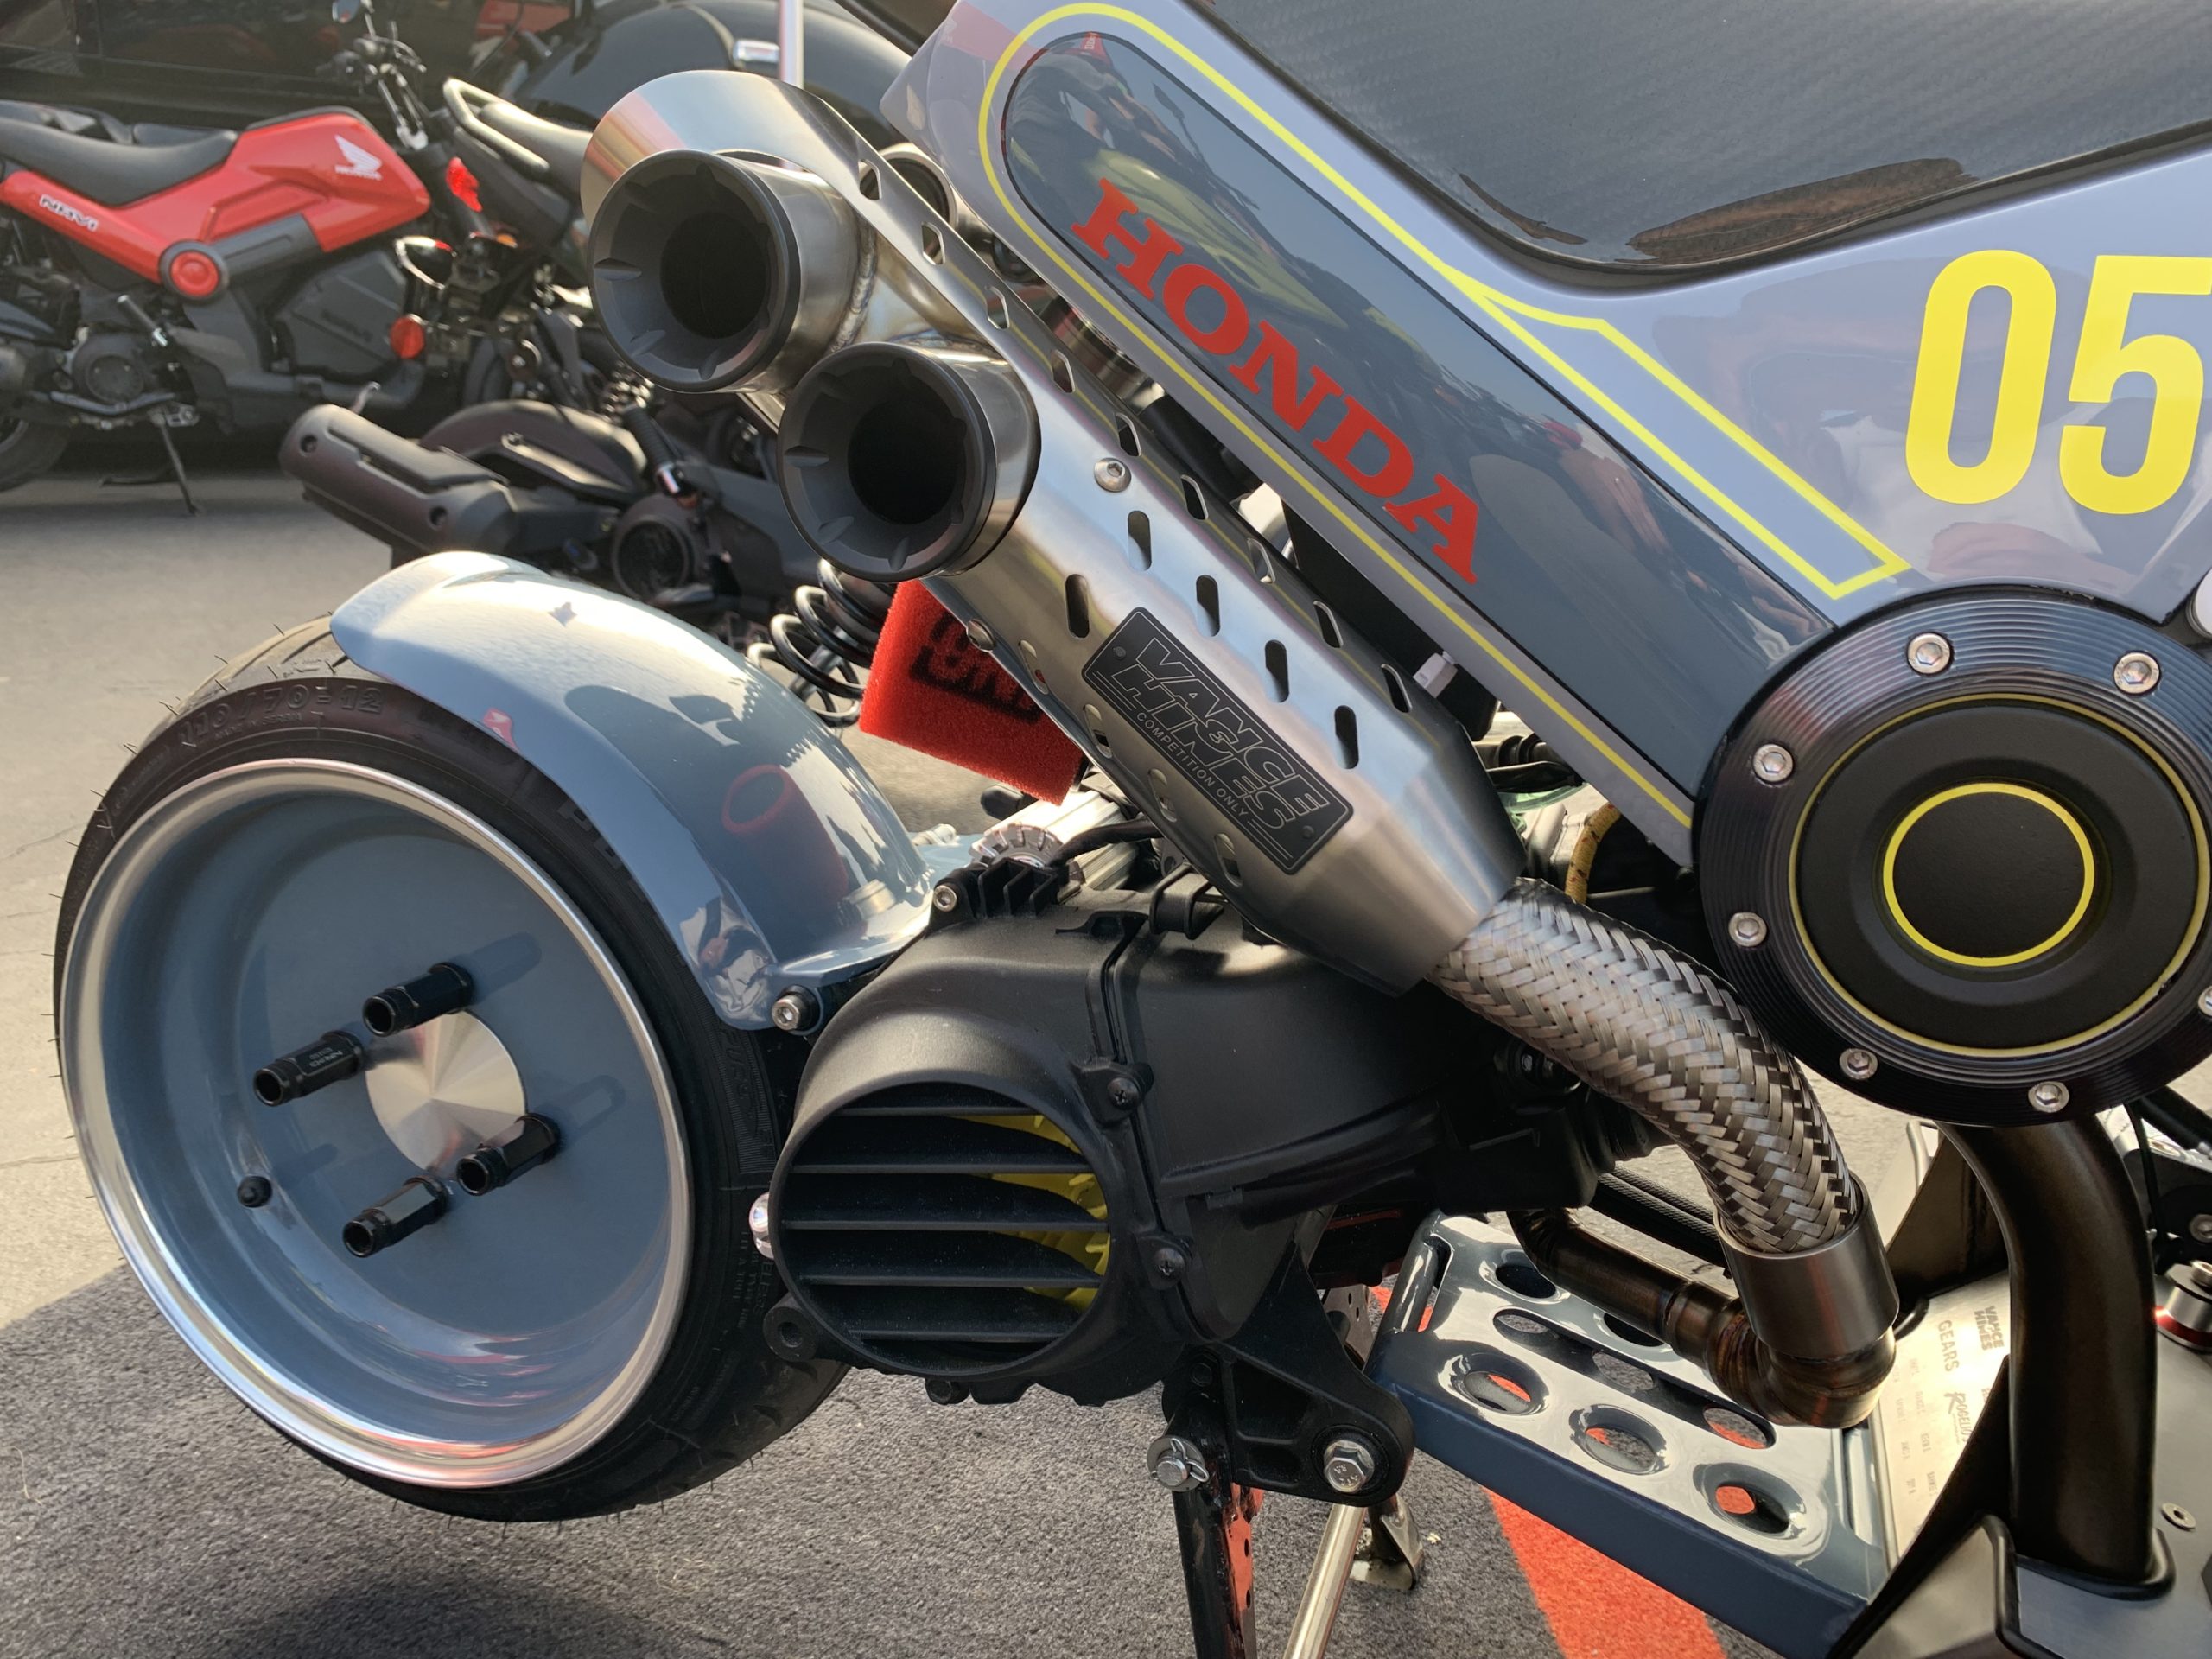 Vance and Hines exhaust pipes on 2022 Honda Navi at IMS Outdoors 2021